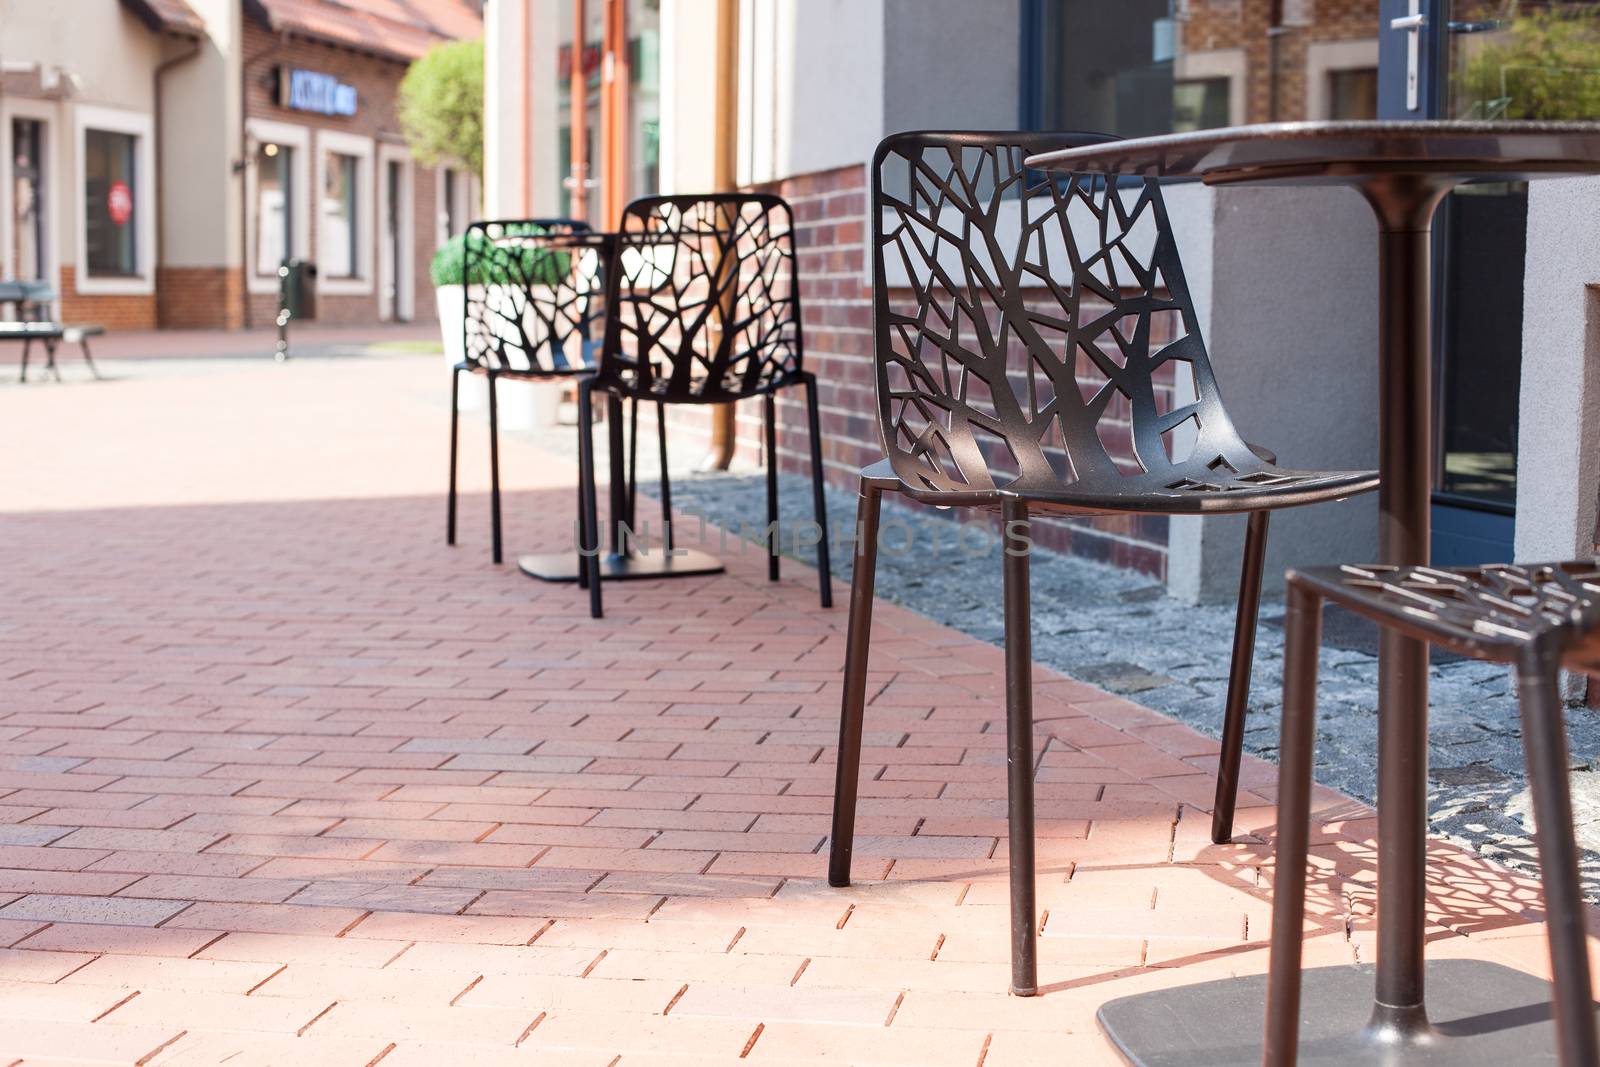 Modern carved chairs with trees in a cafe on the street